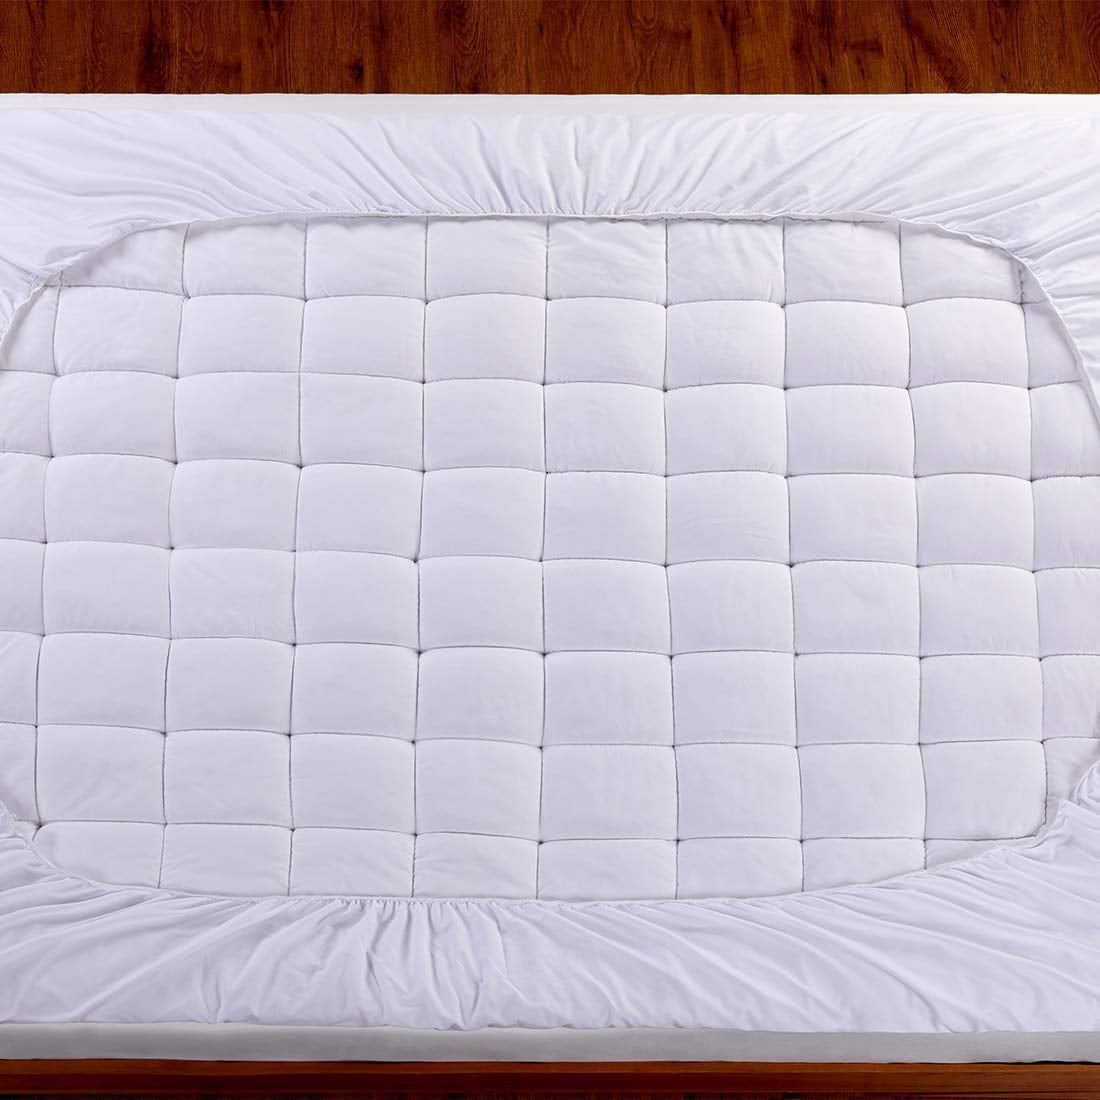 Details about   White Bed Twin Mattress Pad Cover Cotton Top Topper Stretches to 18” Deep Pocket 